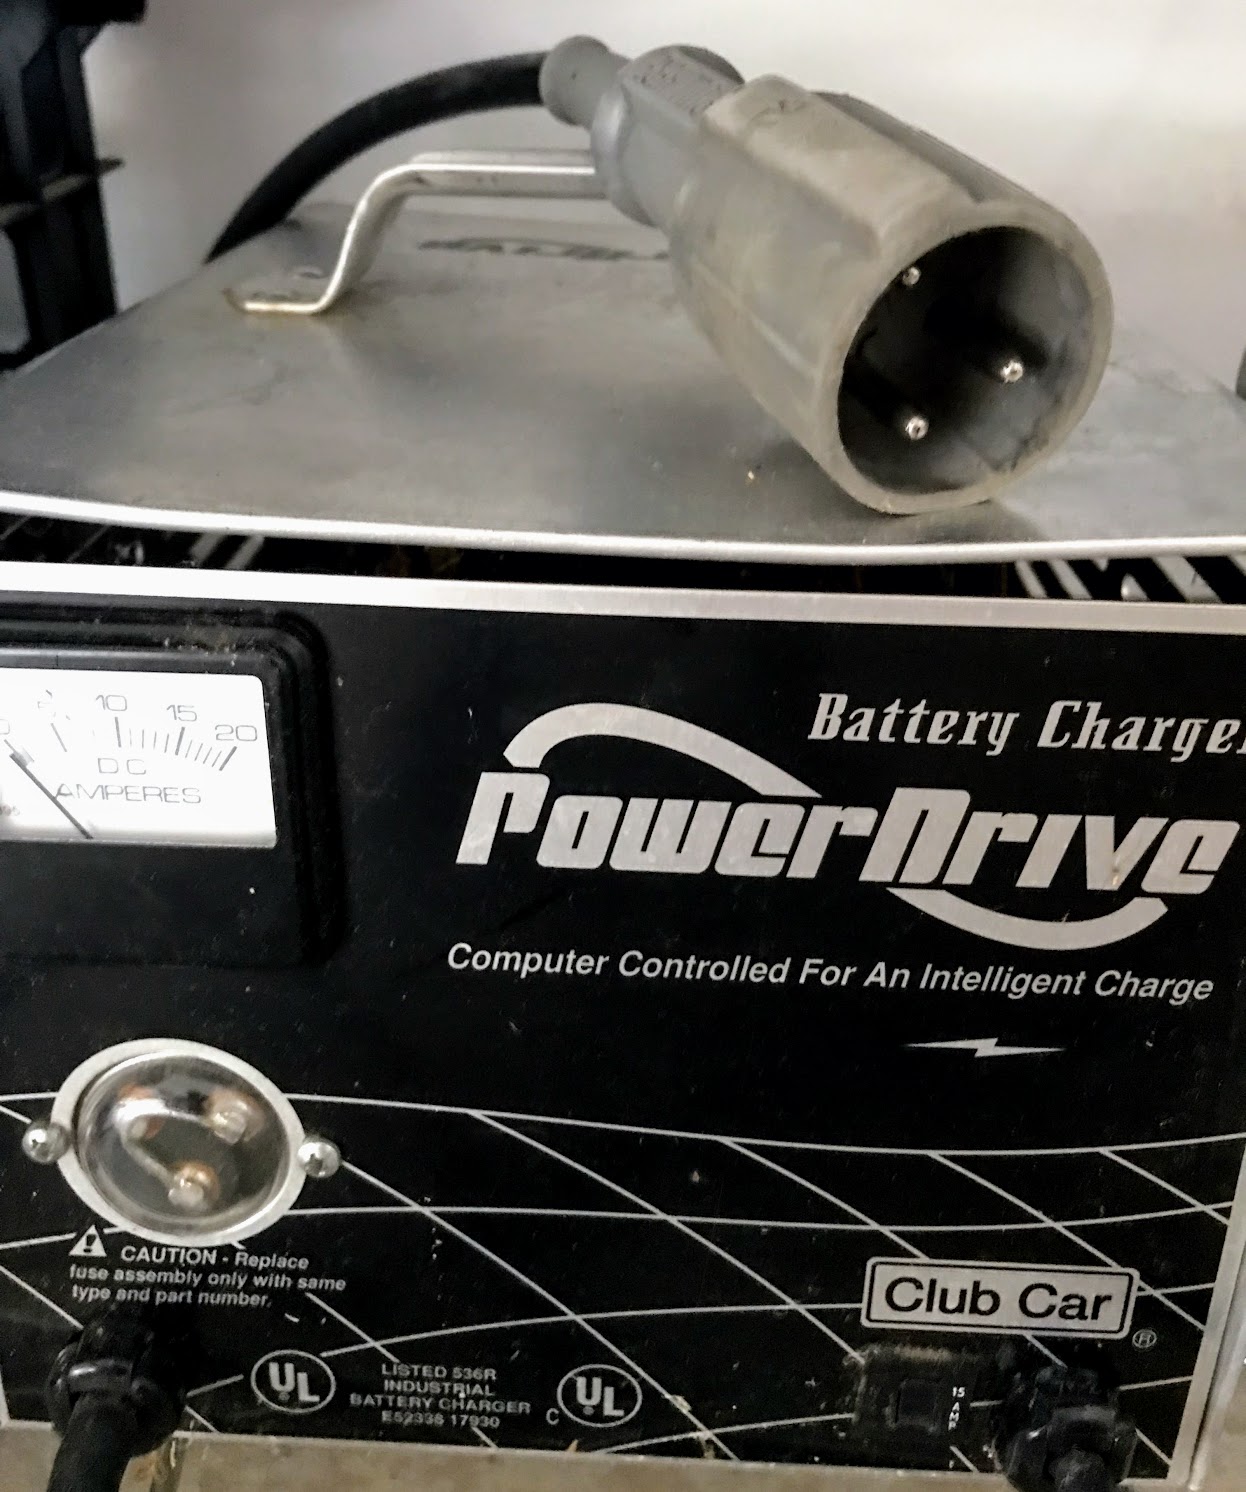 Club Car Battery Charger - When Is It Time to Replace Your Charger?